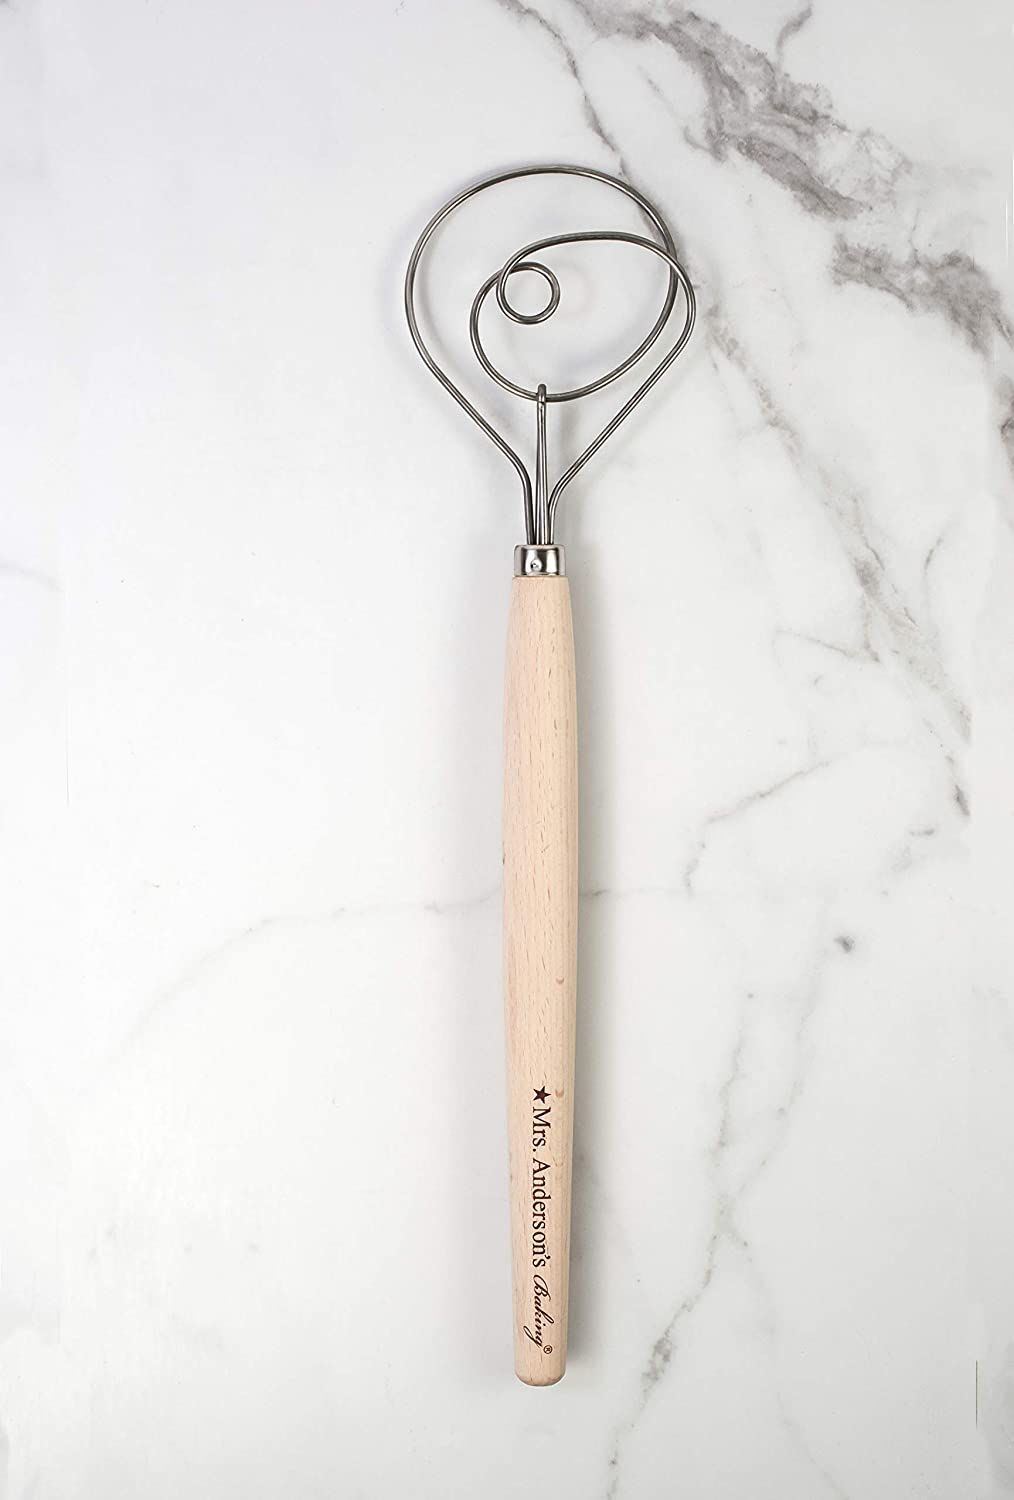 Mrs. Anderson's Baking Dough Whisk 18/8 Stainless Steel Blade, 15-Inches, wood | Amazon (US)